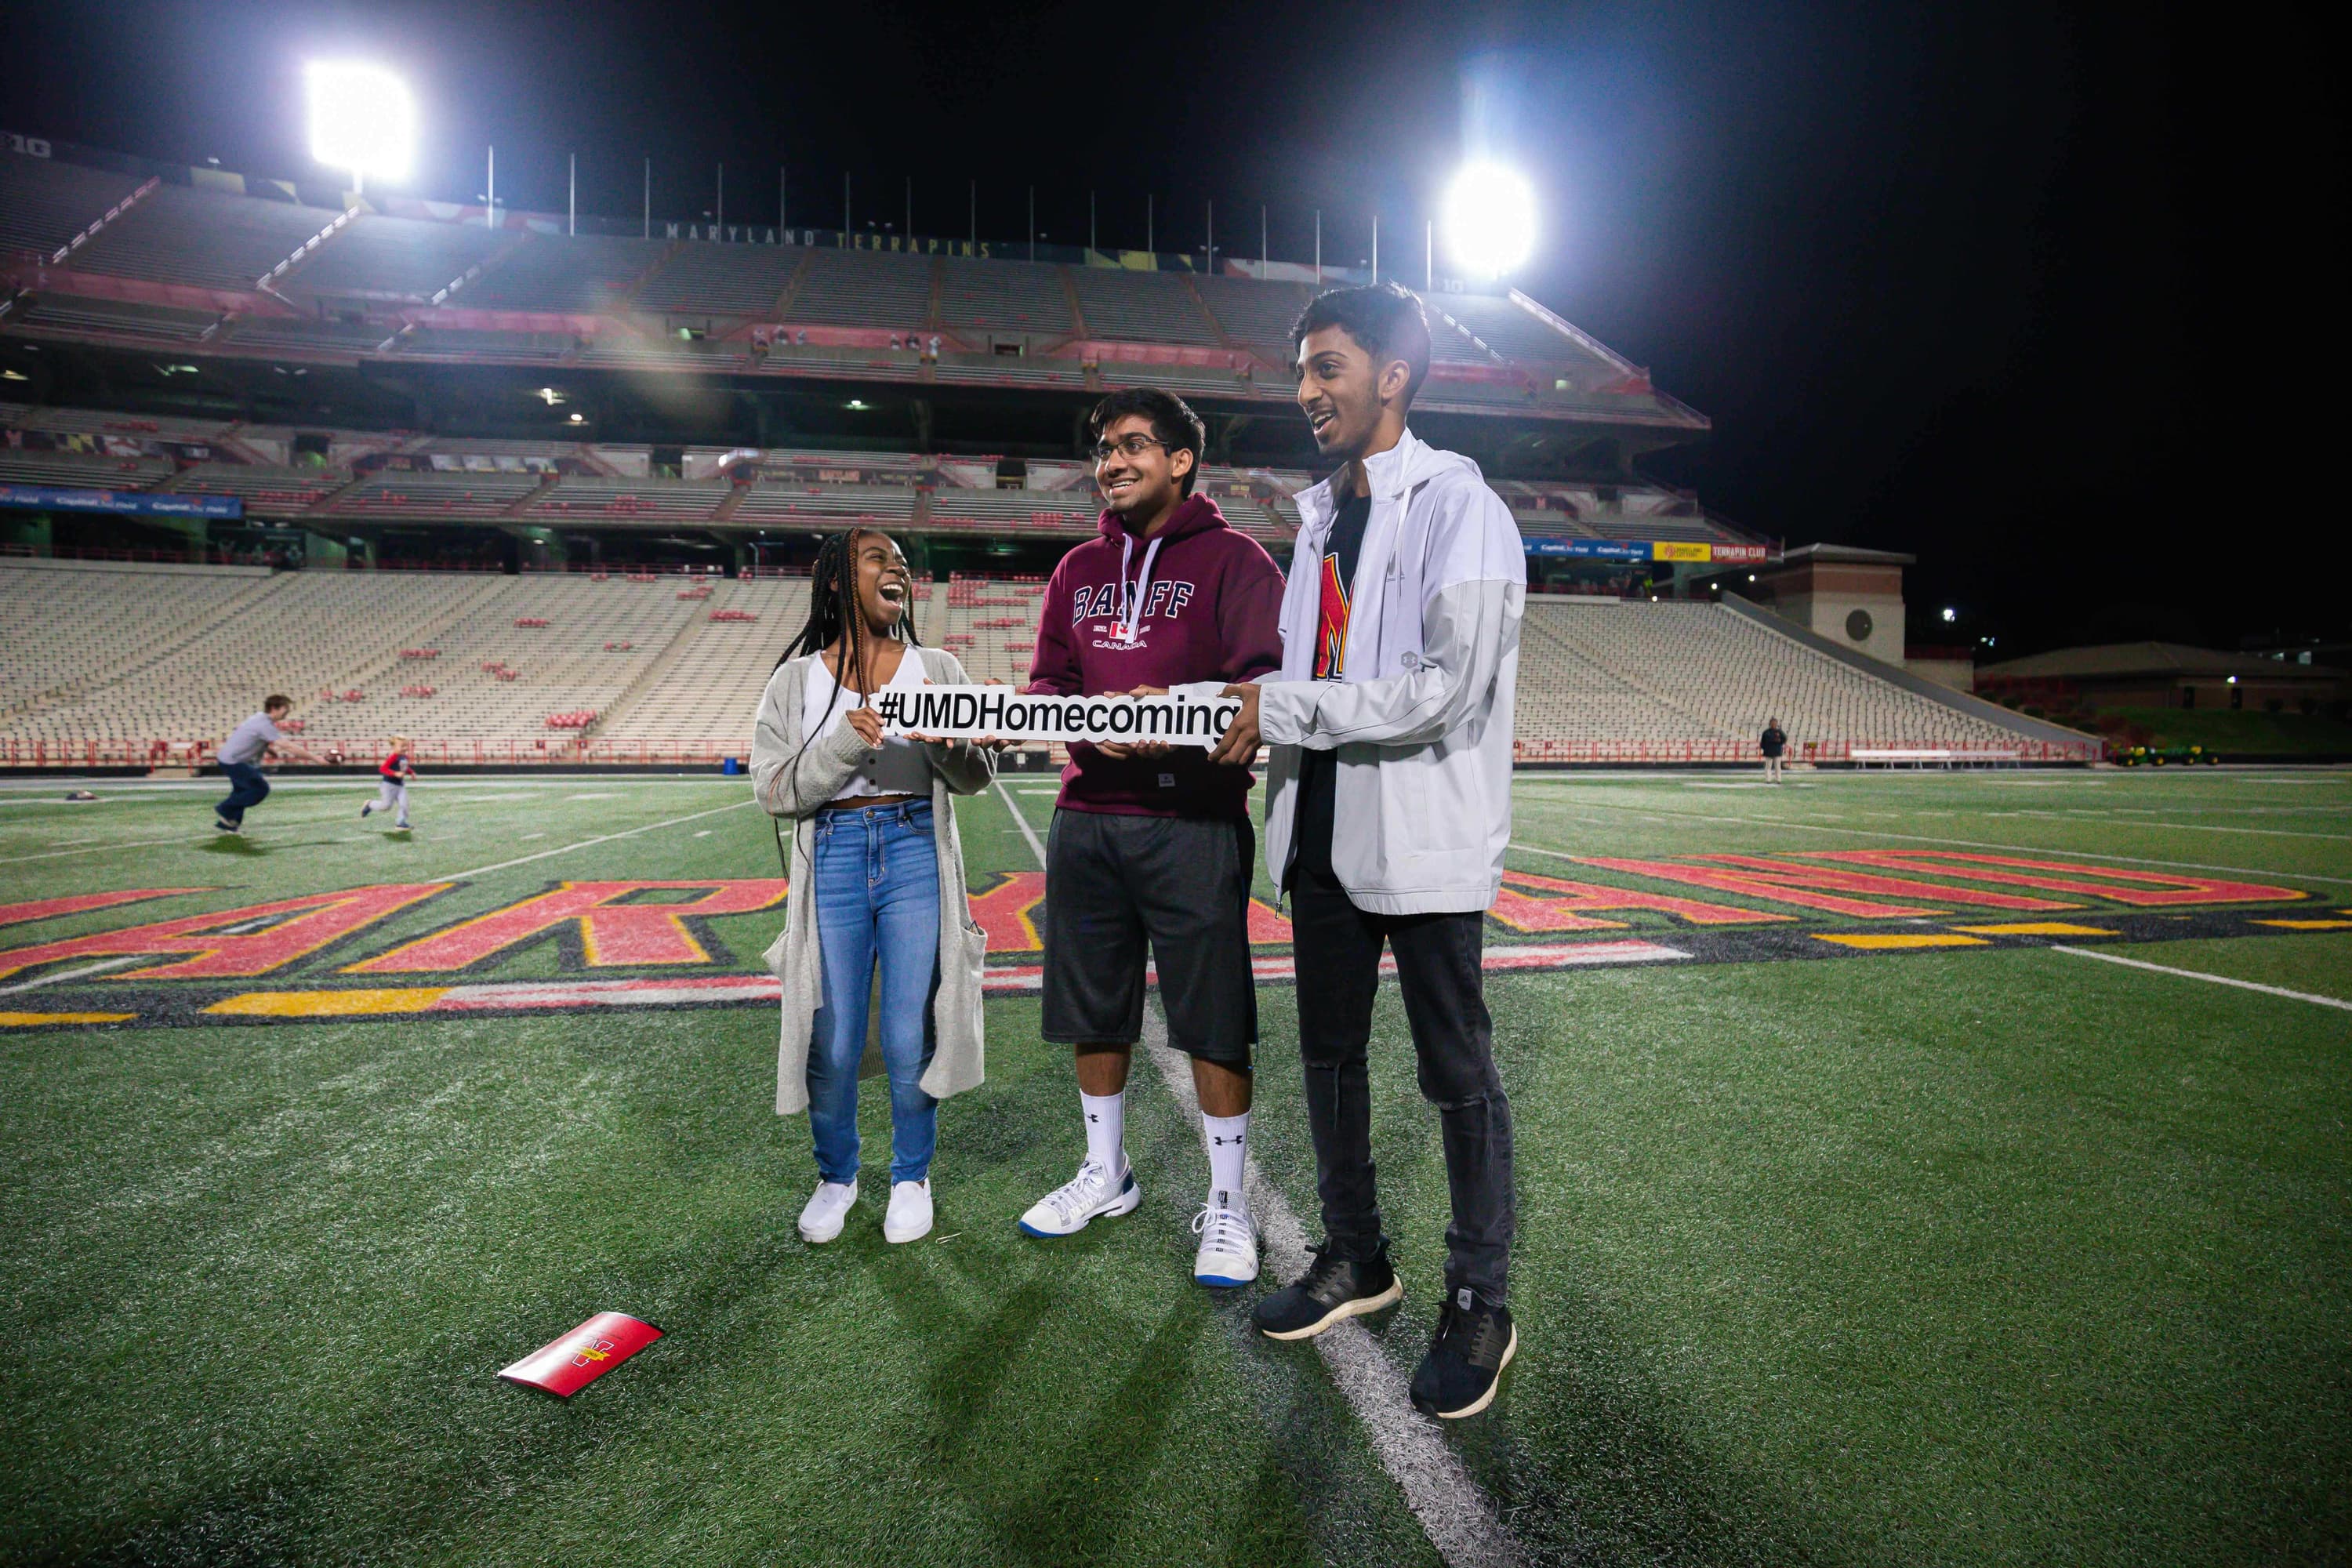 Three students standing on the field in Maryland Stadium holding a sign that says #UMDHomecoming